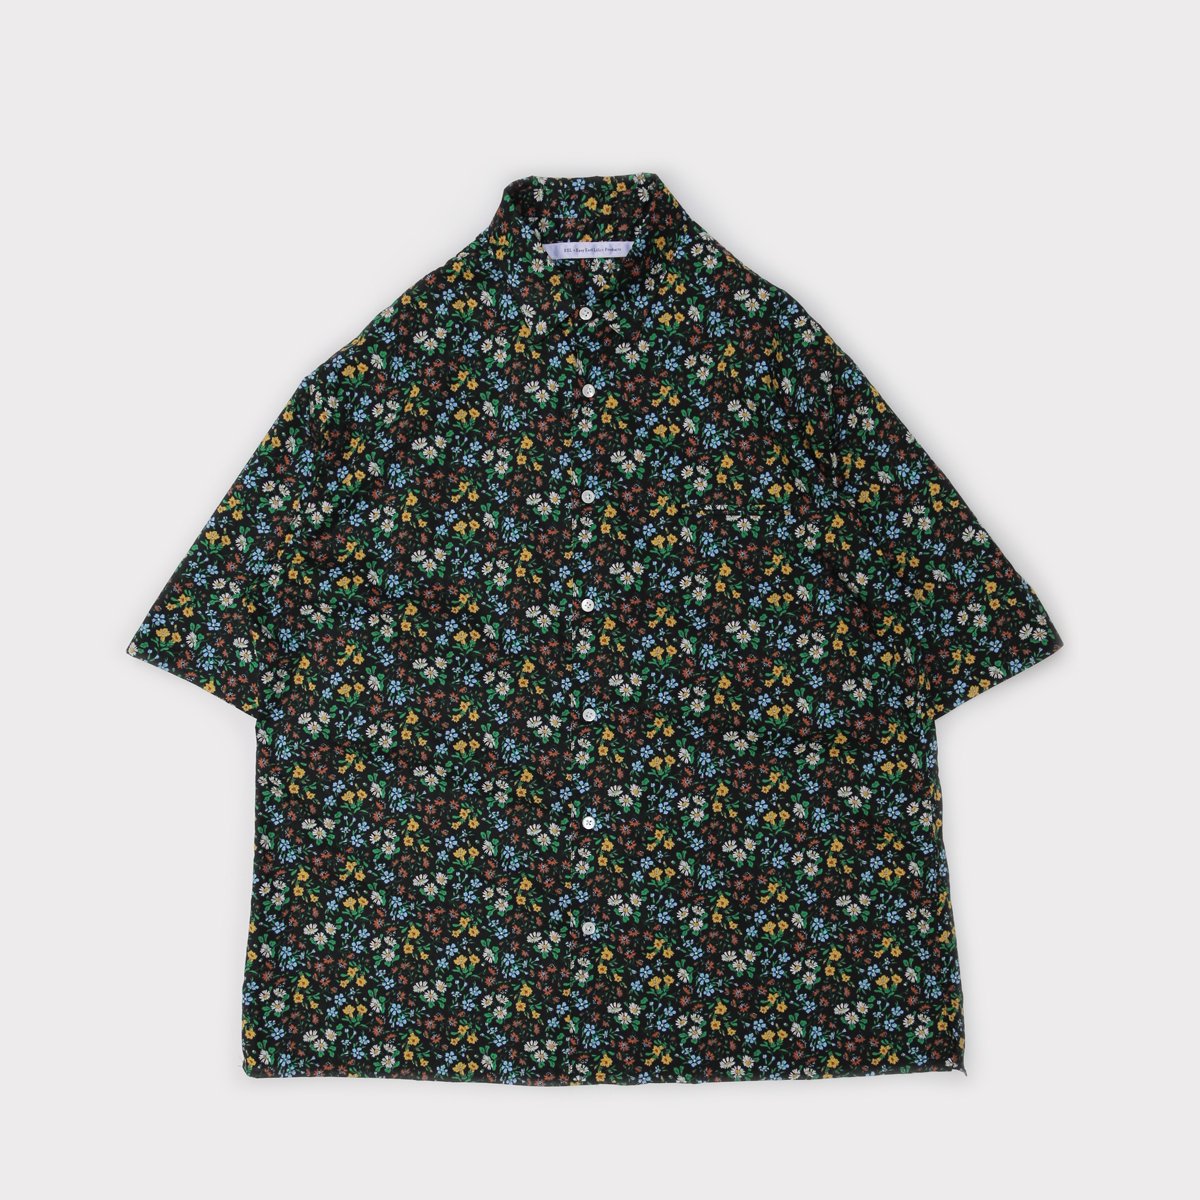 Grooming Shirt S/S  Floral-black